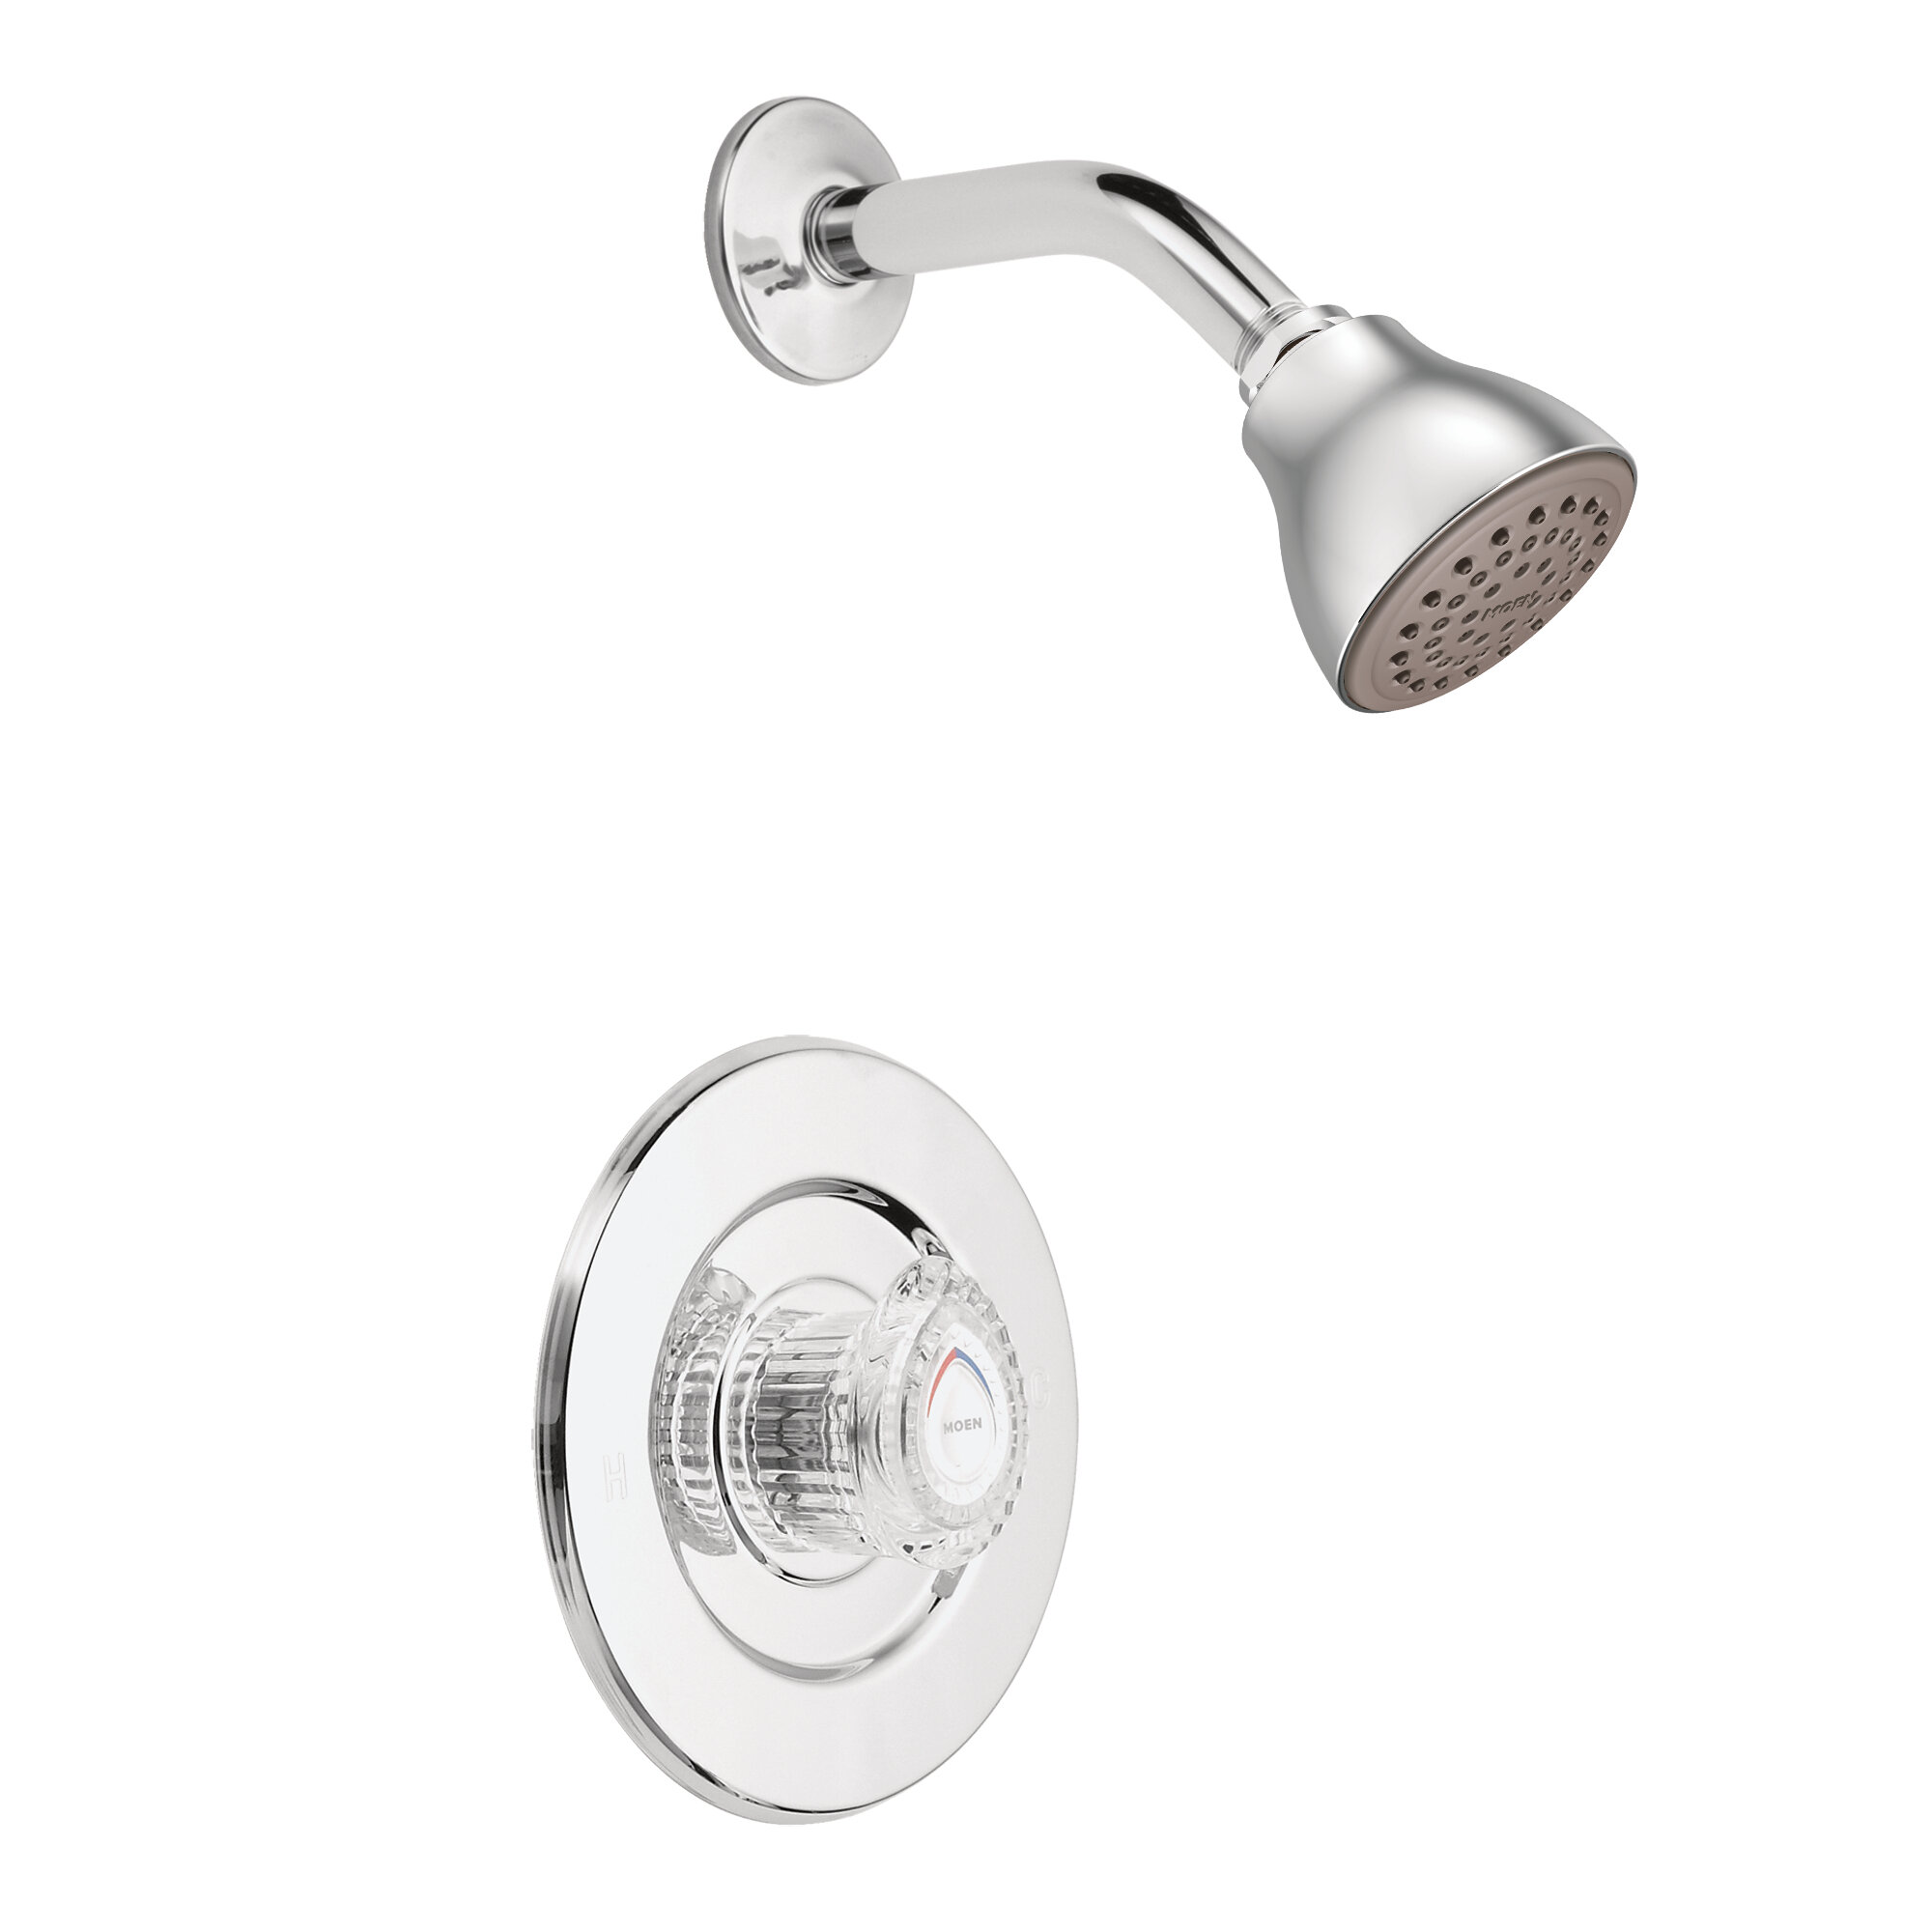 Moen Chateau Single Handle Shower Valve Trim Kit With Select